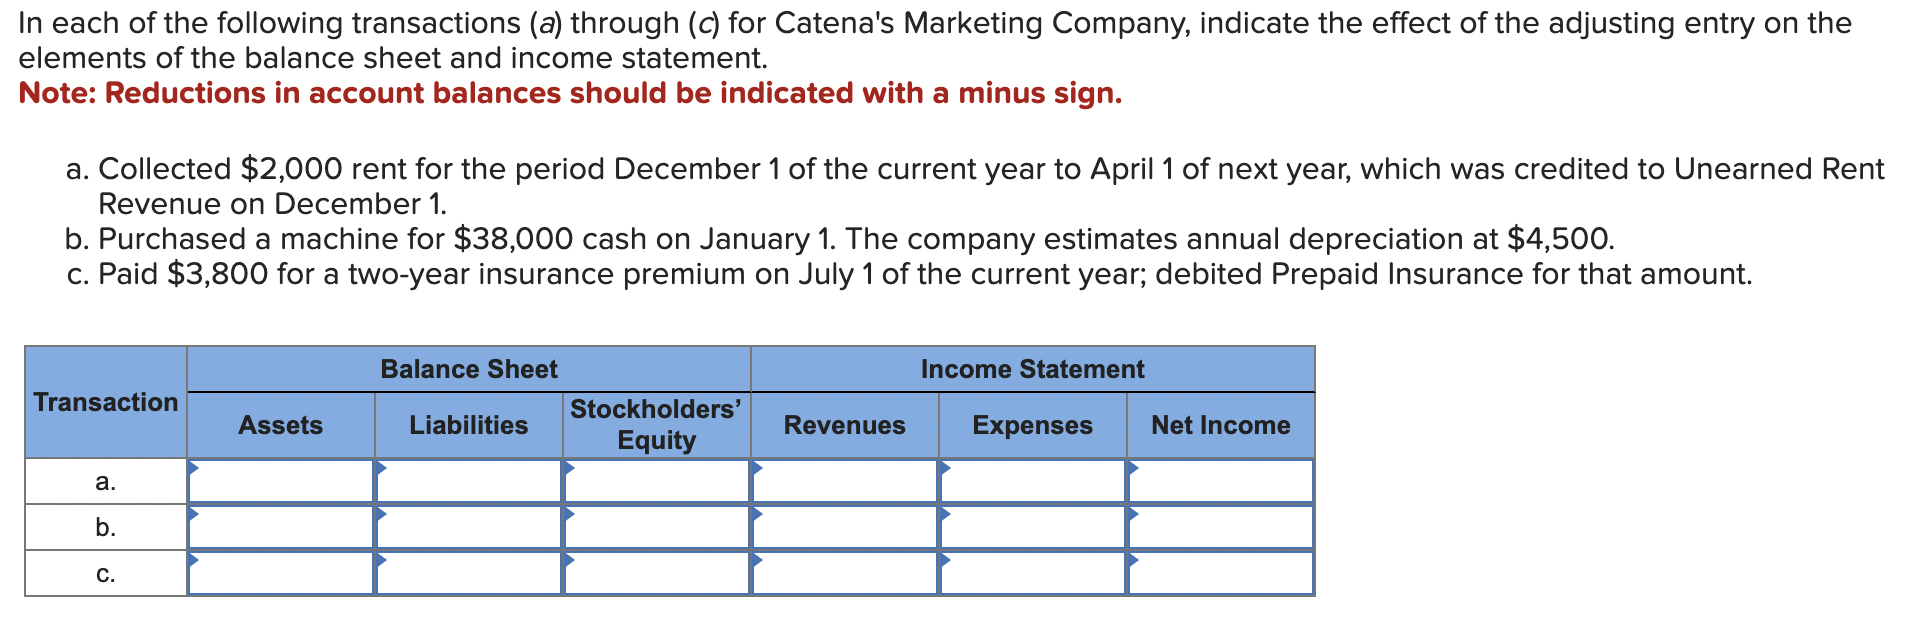 In each of the following transactions (a) through (c) for Catena's Marketing Company, indicate the effect of